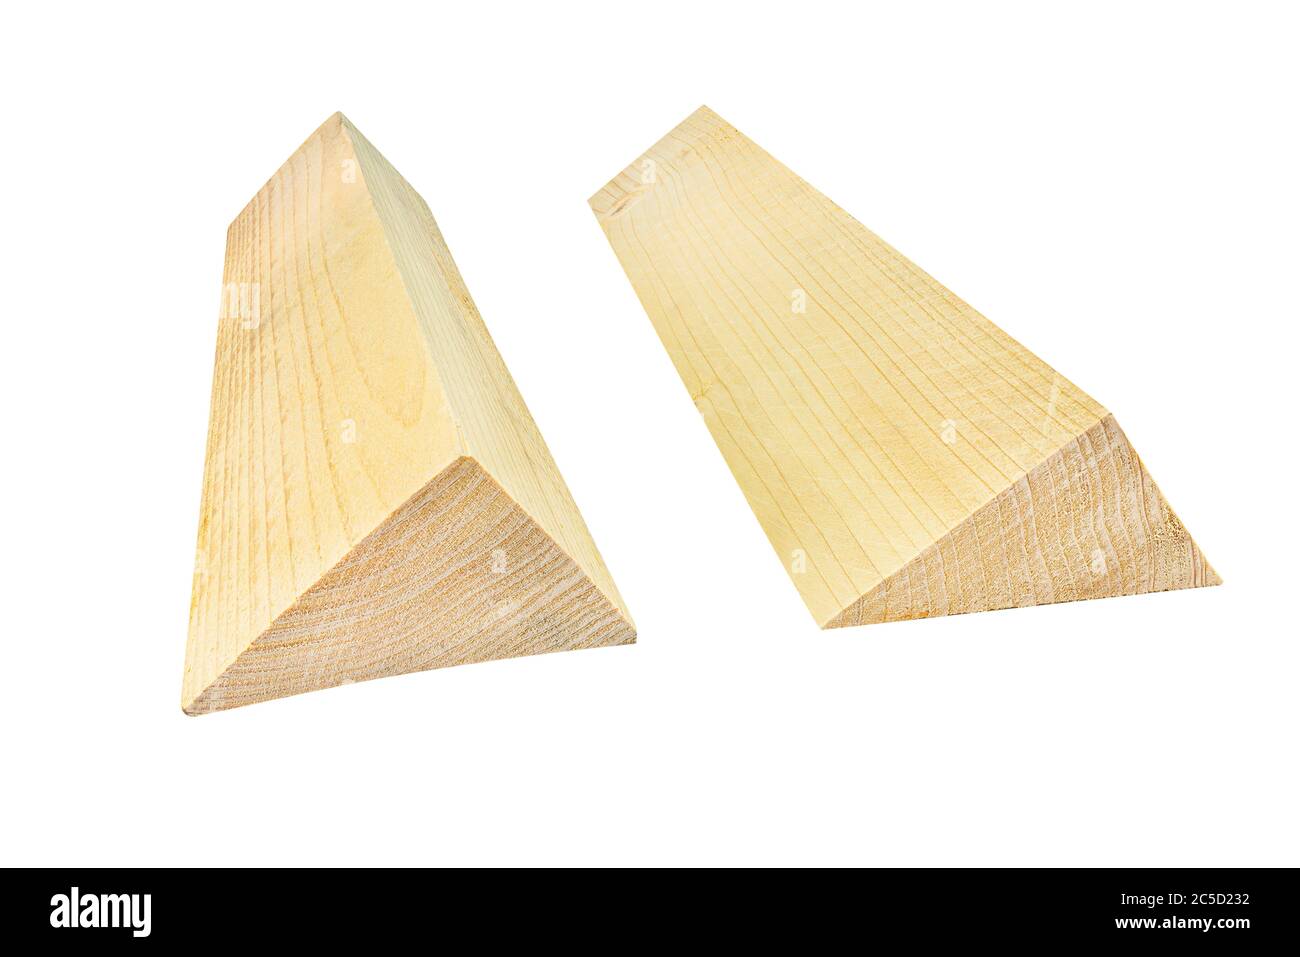 Two wooden wedges isolated on a white background with a clipping path. Stock Photo